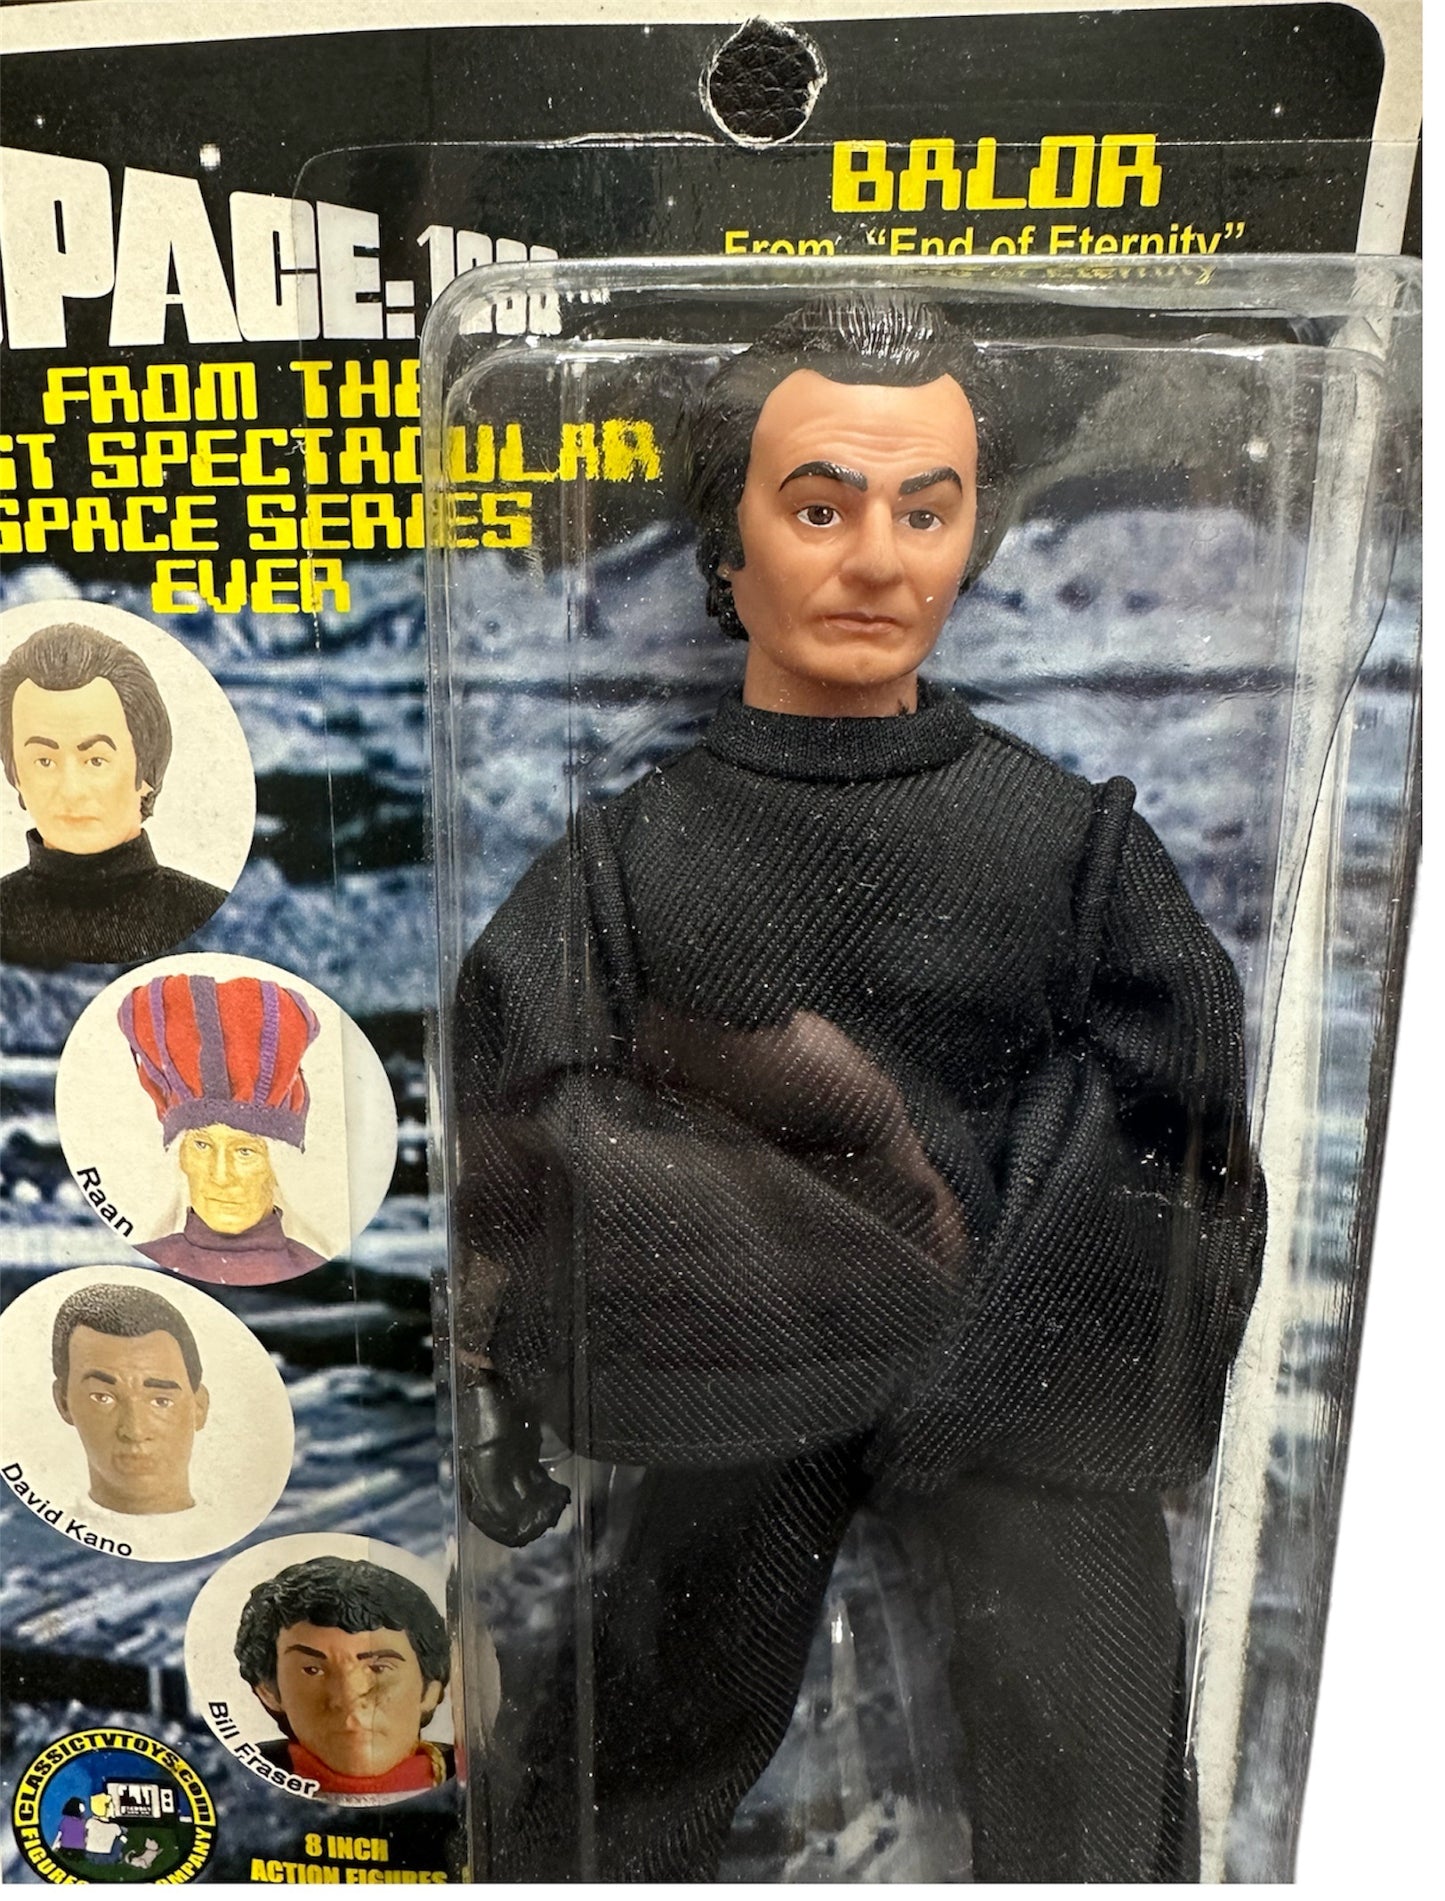 Vintage 2005 Gerry Andersons Space 1999 Mego Style Balor - From The Episode End Of Eternity - 8" Action Figure - Factory Sealed Shop Stock Room Find